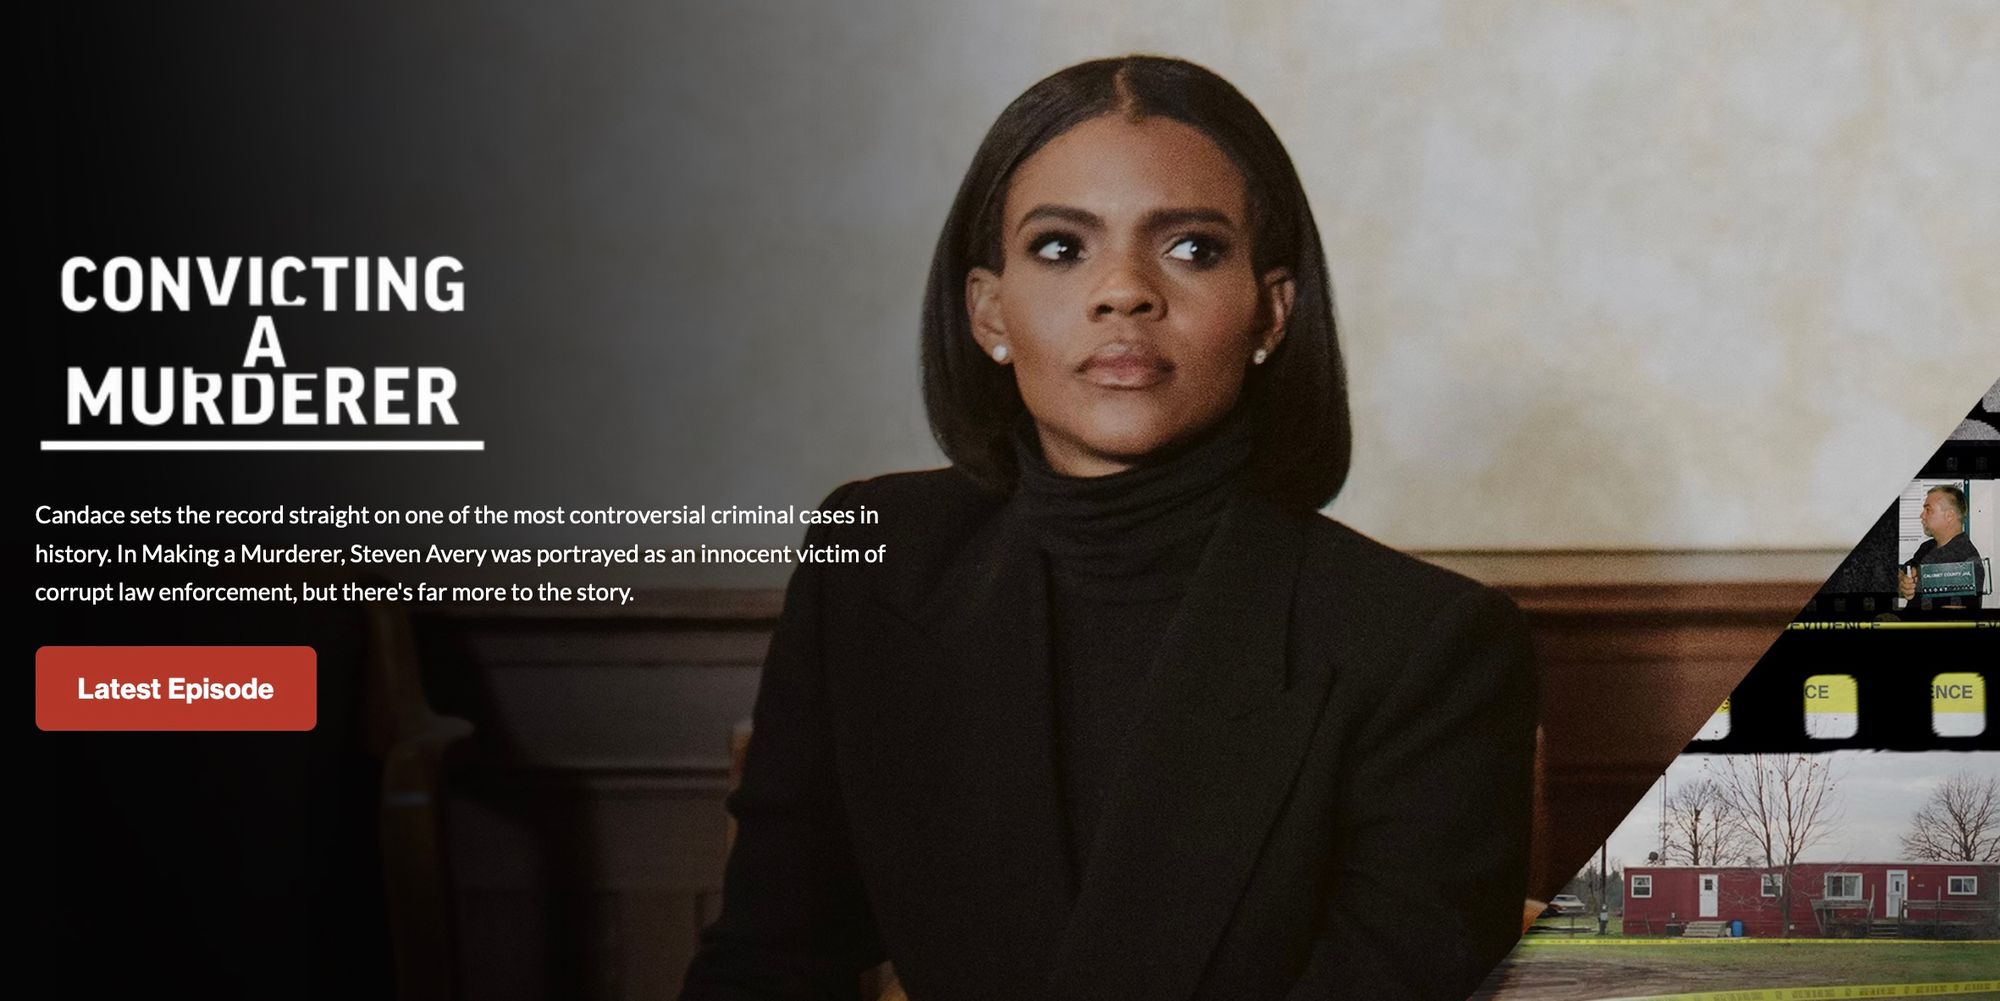 Candace Owens Gets a New Contentious Back-and-Forth, In the Form of Miniseries Convicting a Murderer